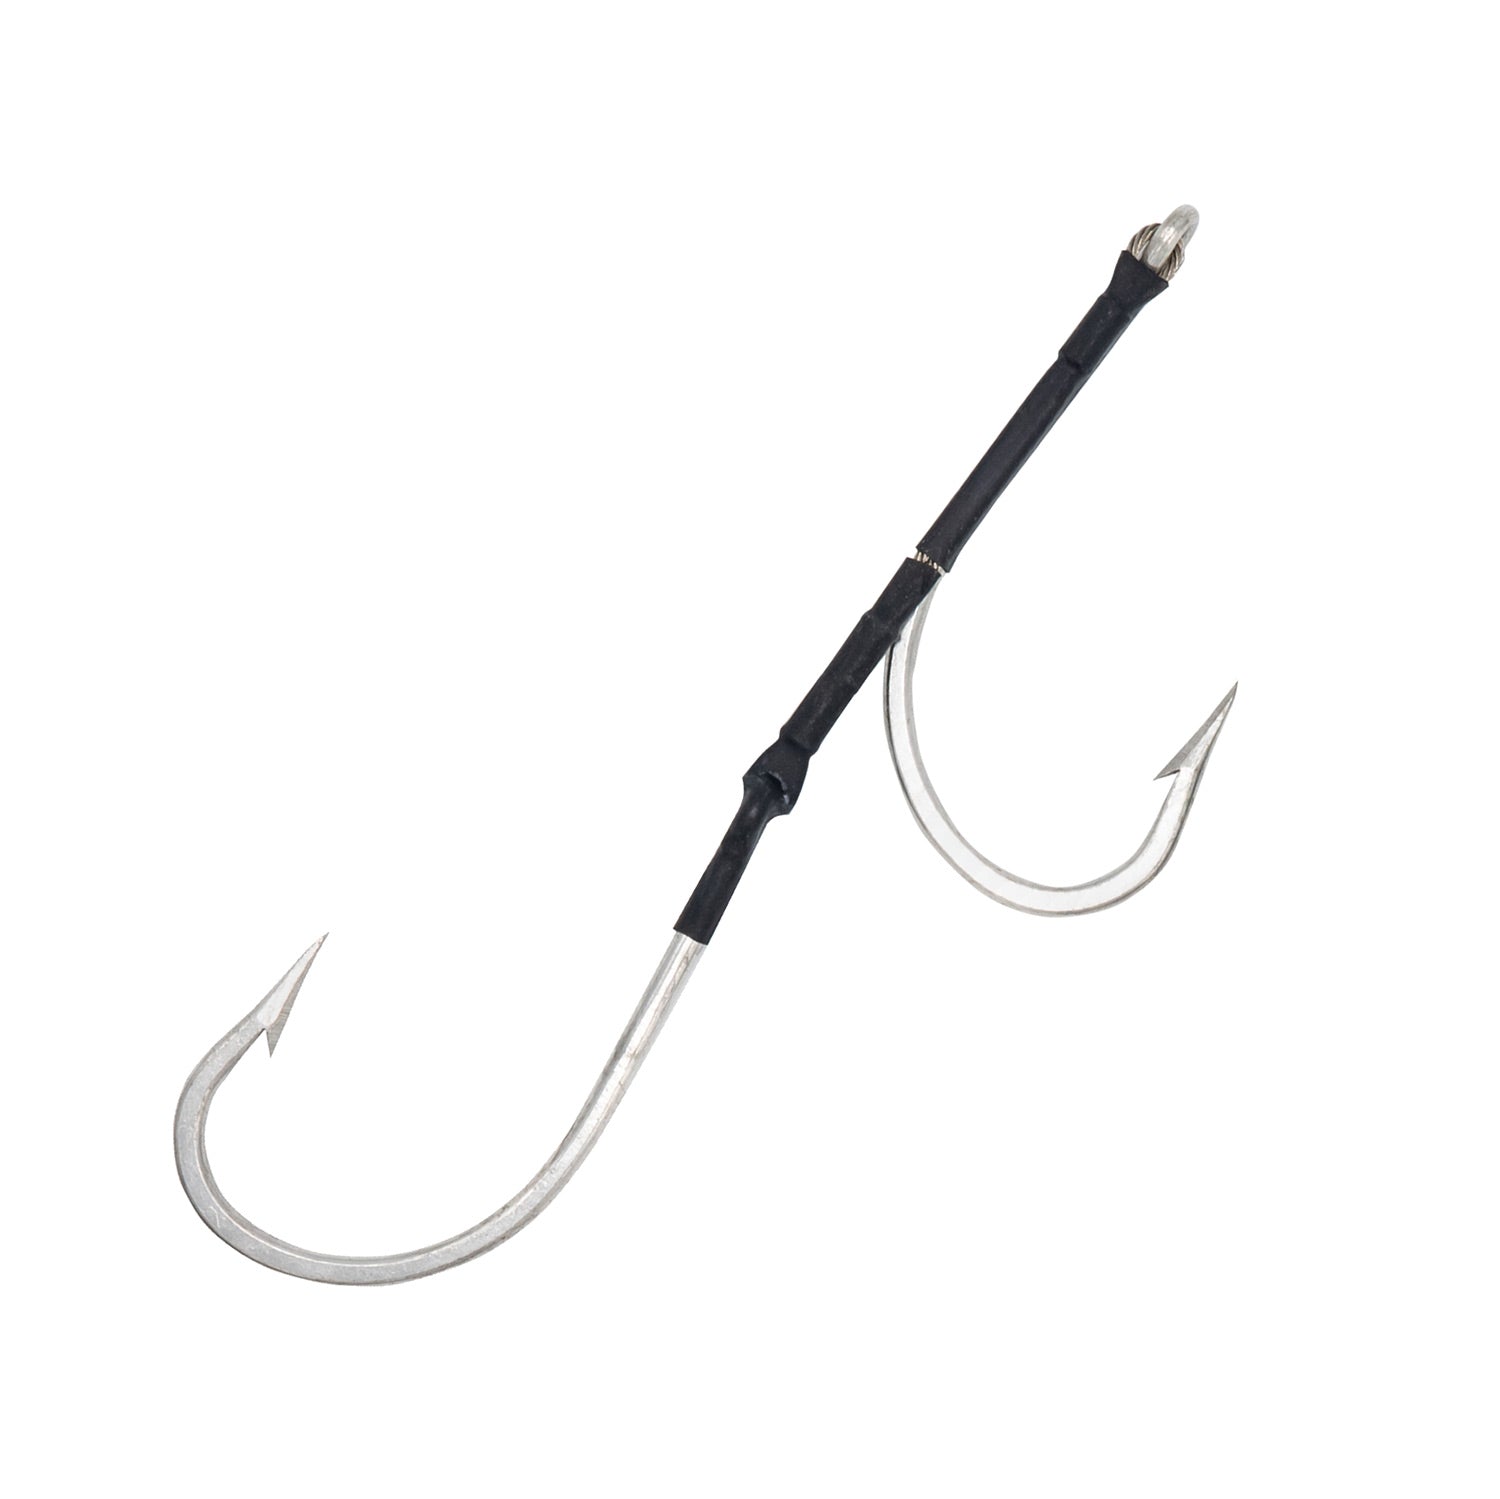  Mustad O'Shaughnessy Large Ring, Forged - Duratin 12